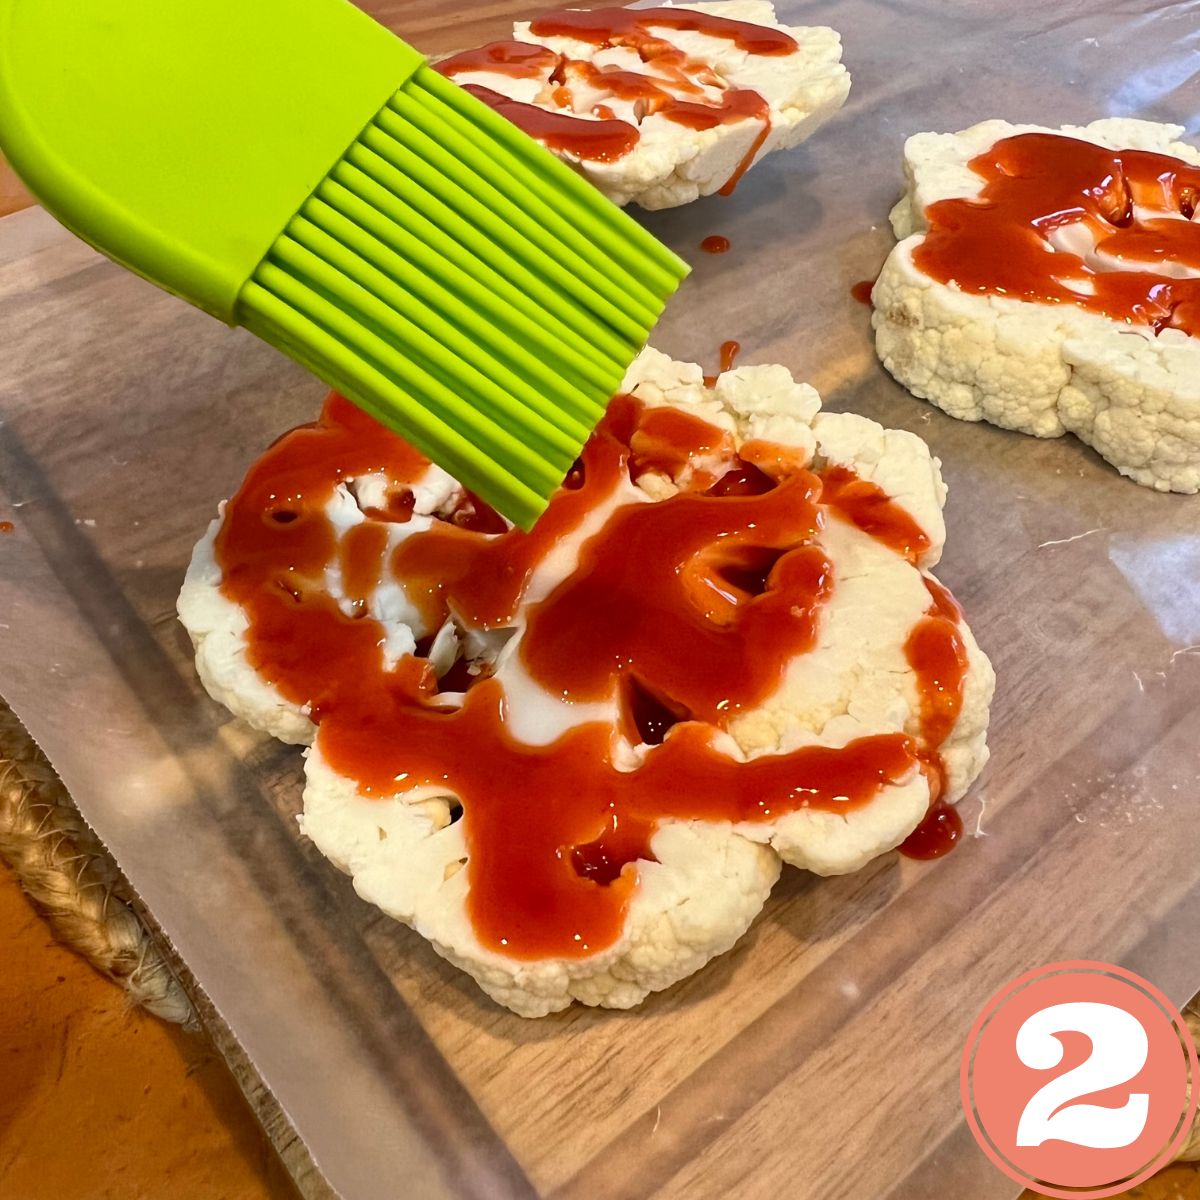 Cauliflower slices on a wooden cutting board brushed with hot sauce